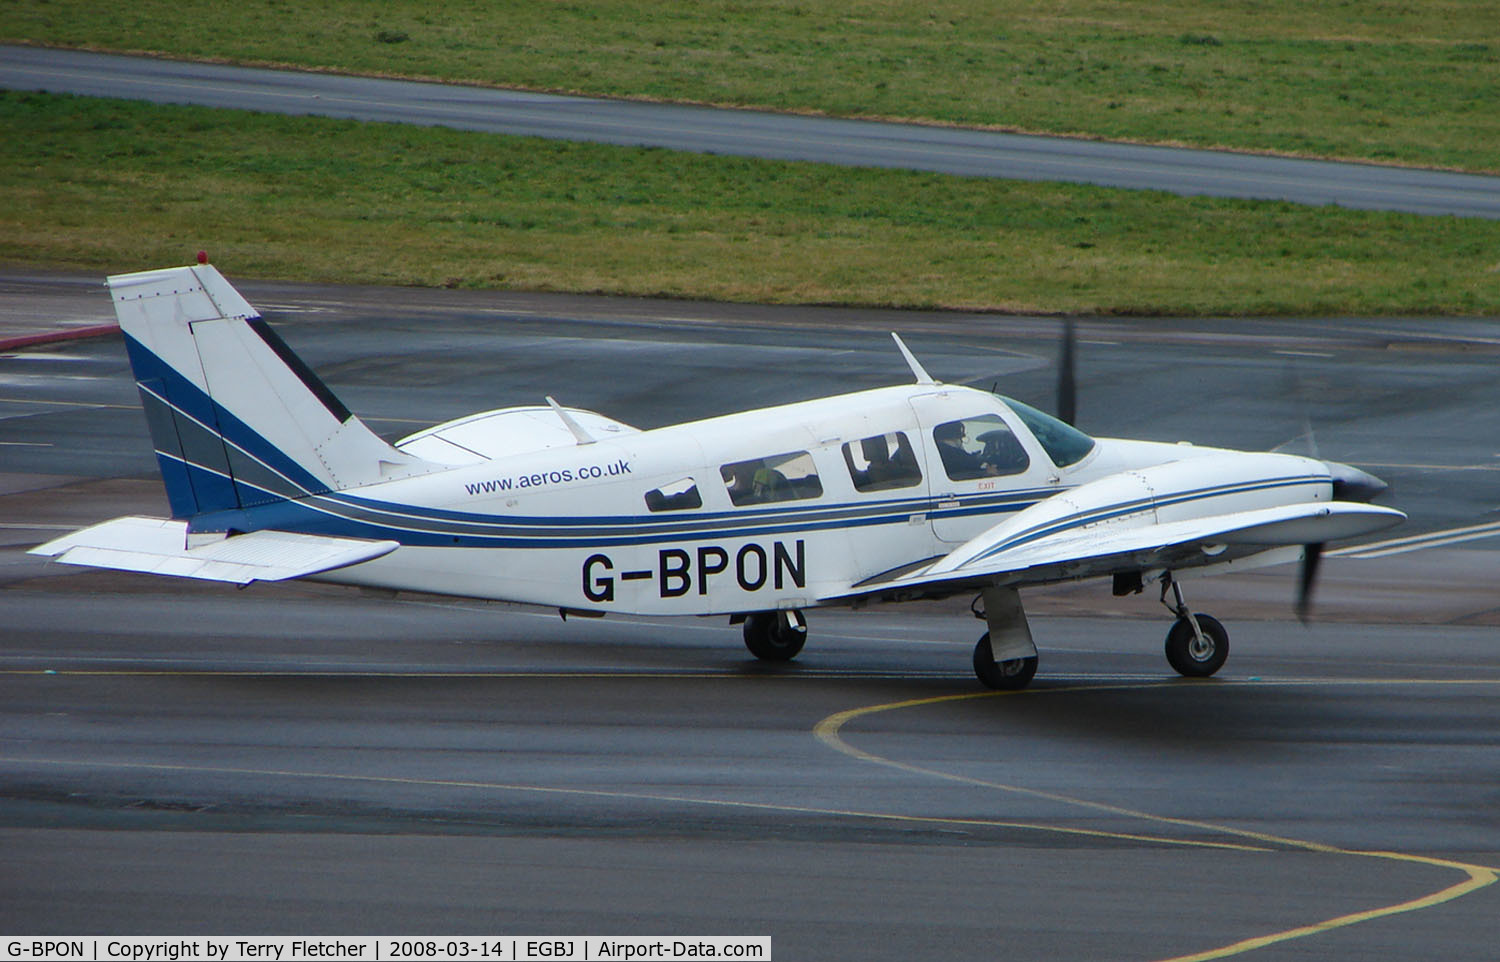 G-BPON, 1975 Piper PA-34-200T Seneca II C/N 34-7570040, Resident aircraft based at Gloucestershire Airport